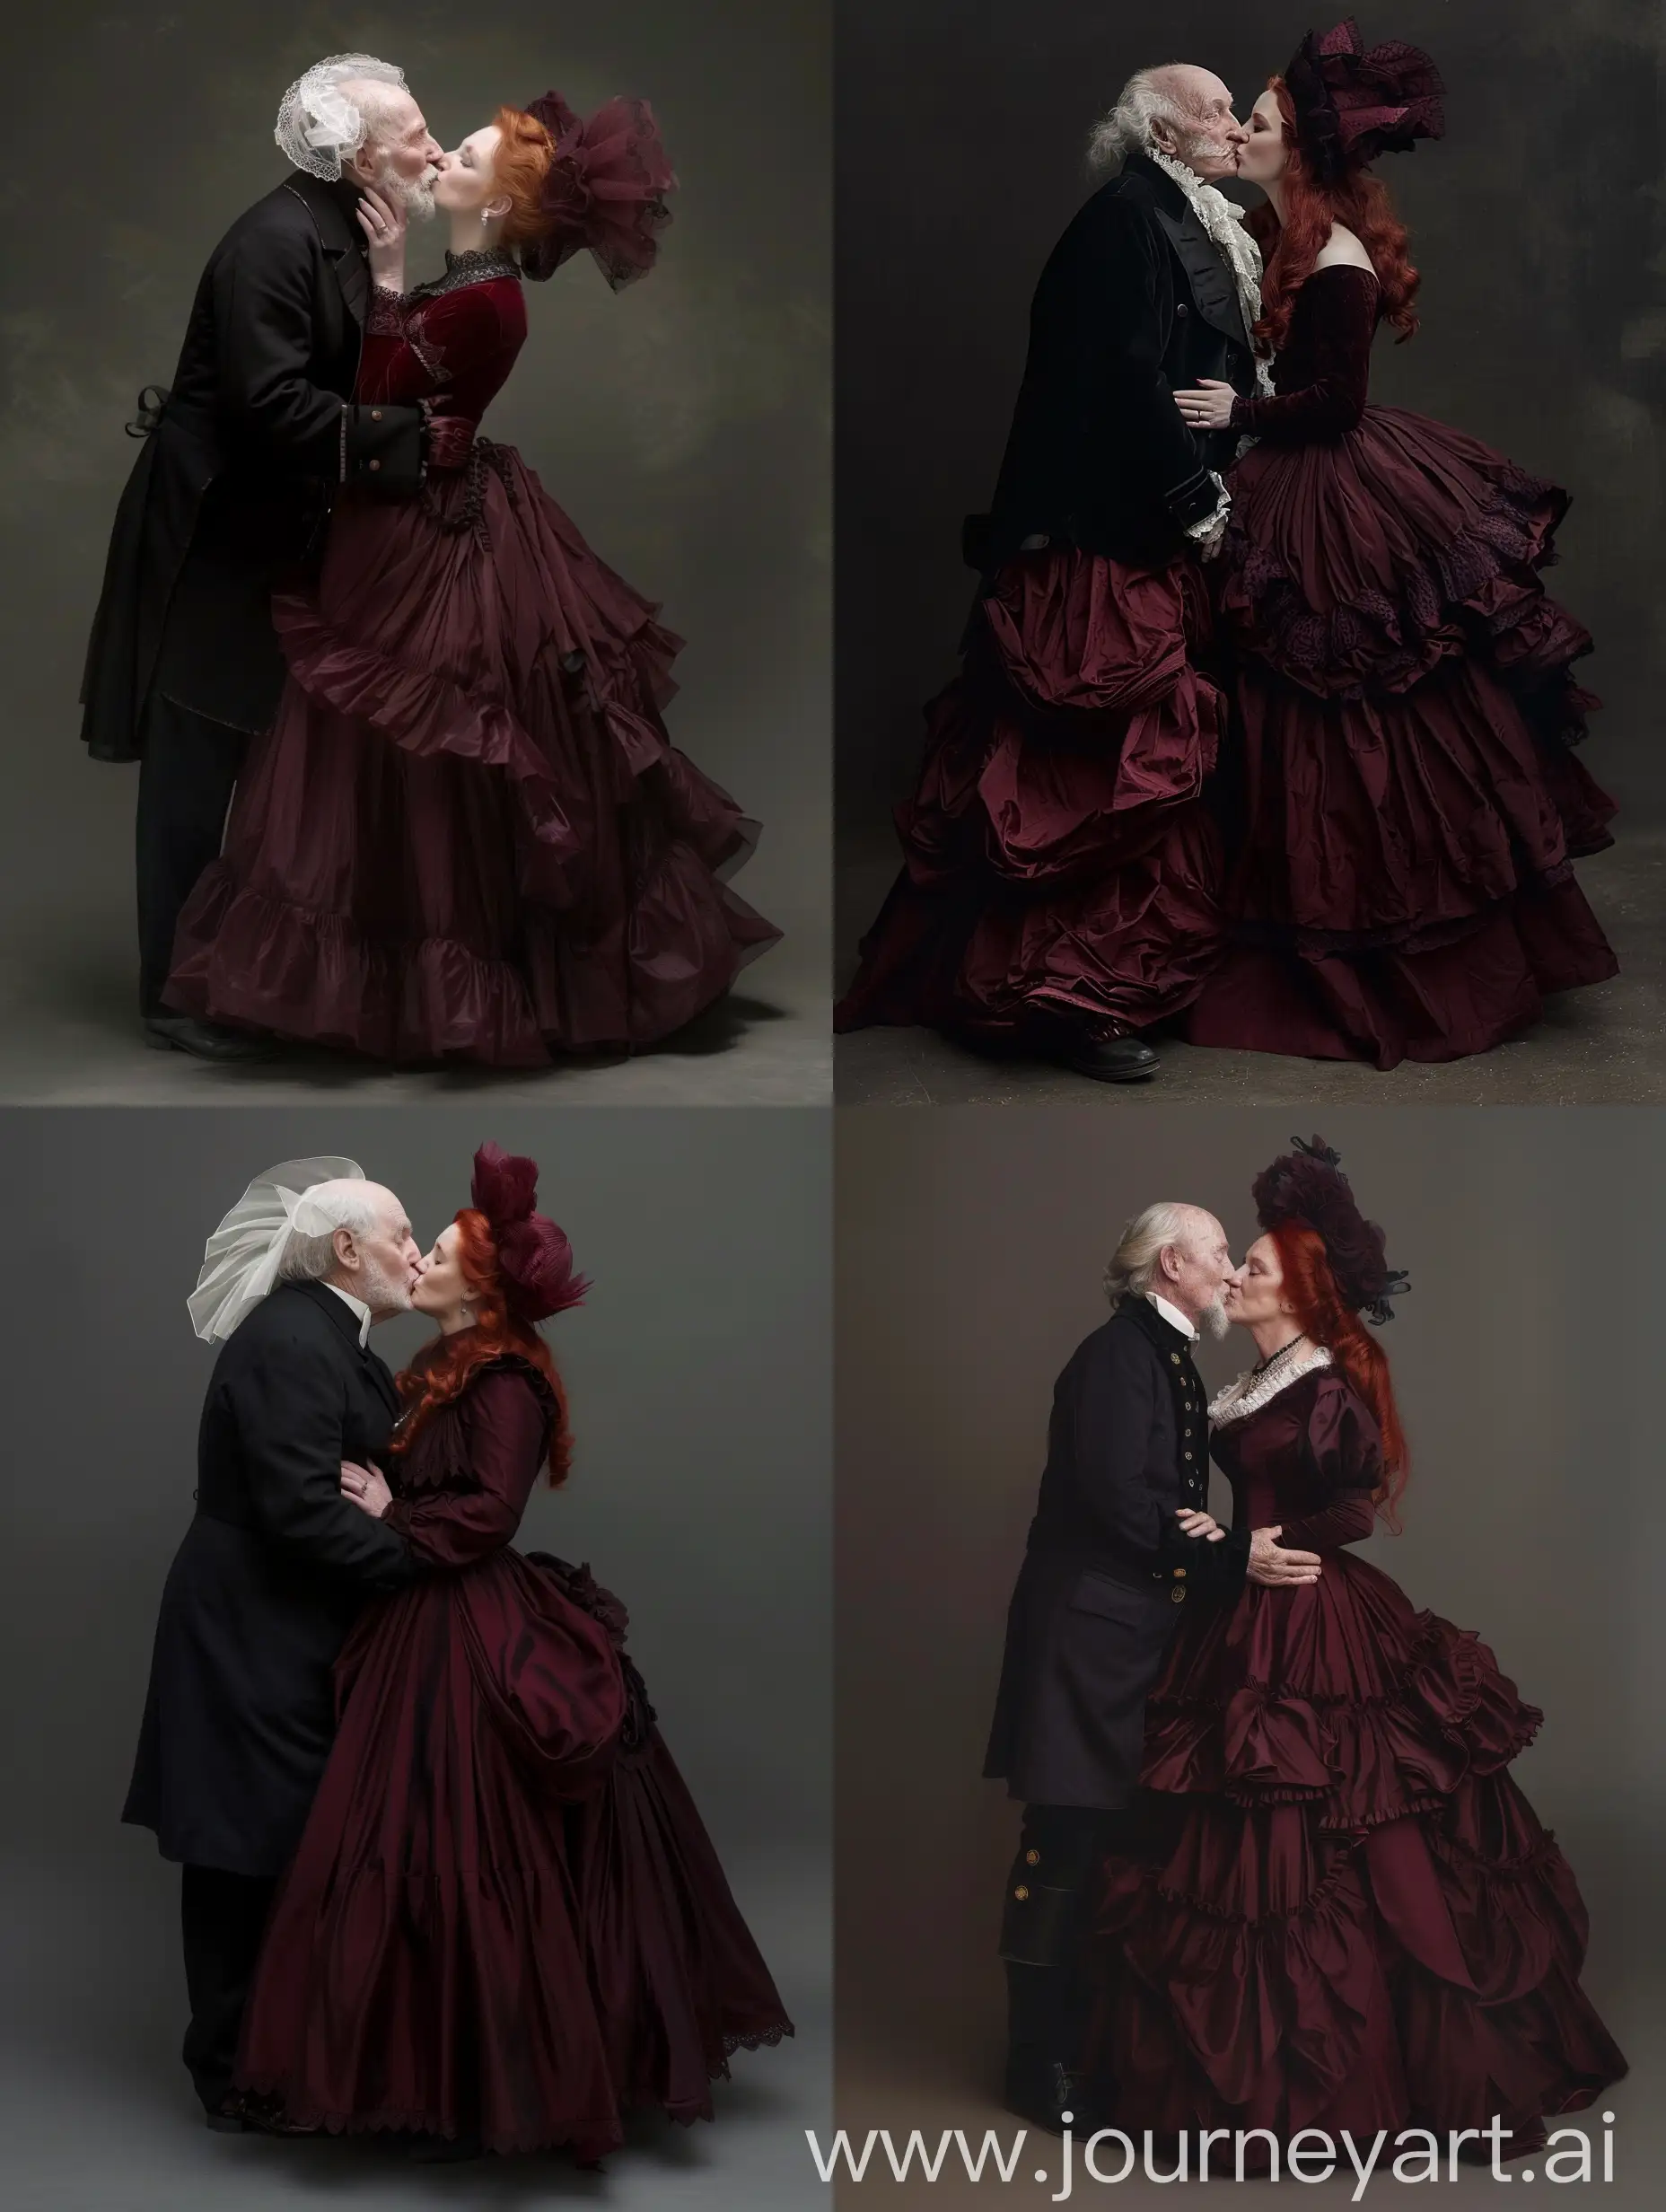 Victorian-Newlyweds-Romantic-Kiss-Between-RedHaired-Bride-and-Groom